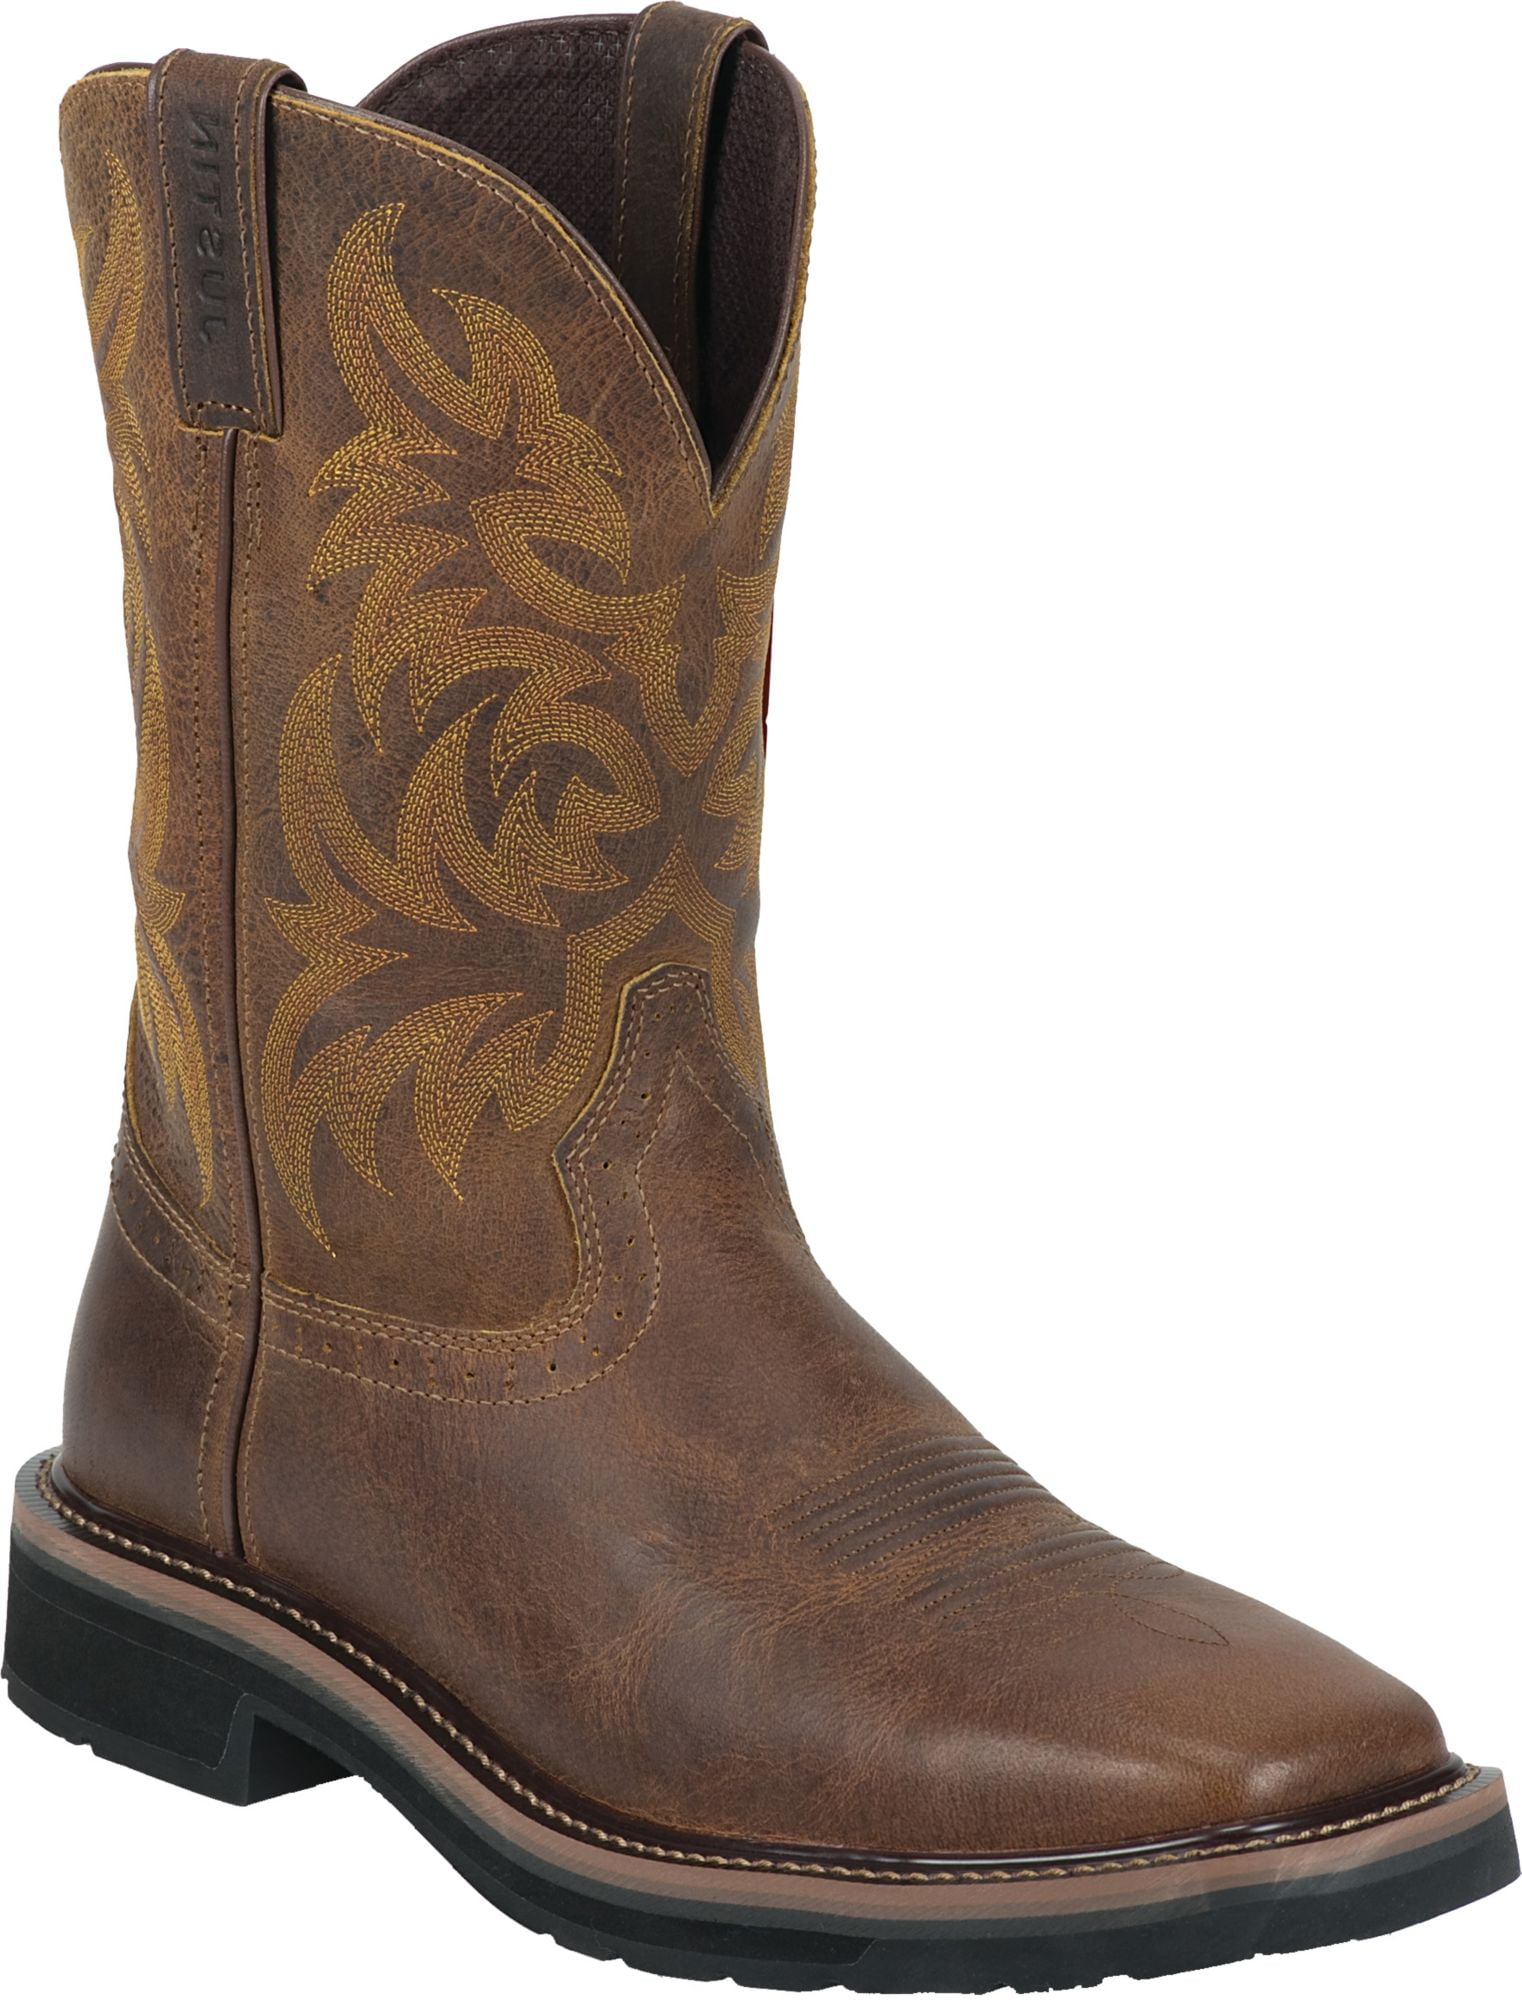 Justin Boots - Justin Boots Men's 